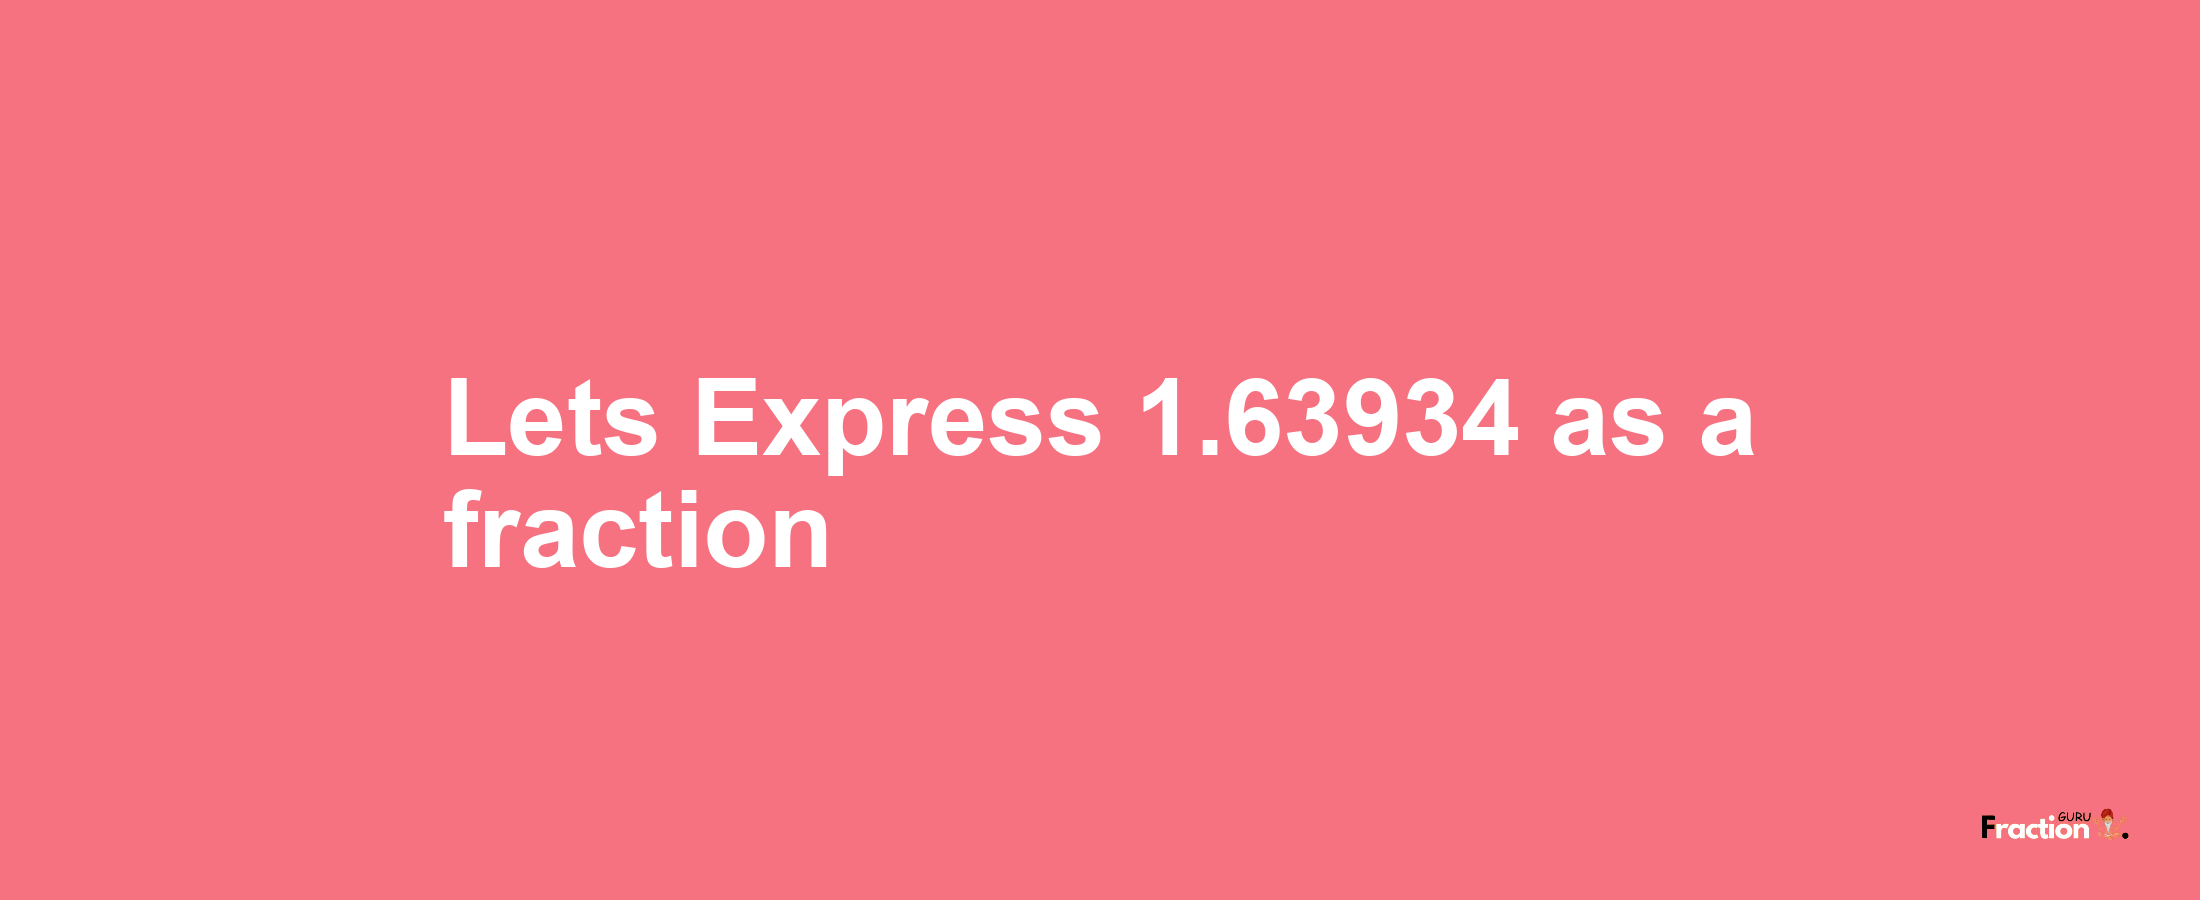 Lets Express 1.63934 as afraction